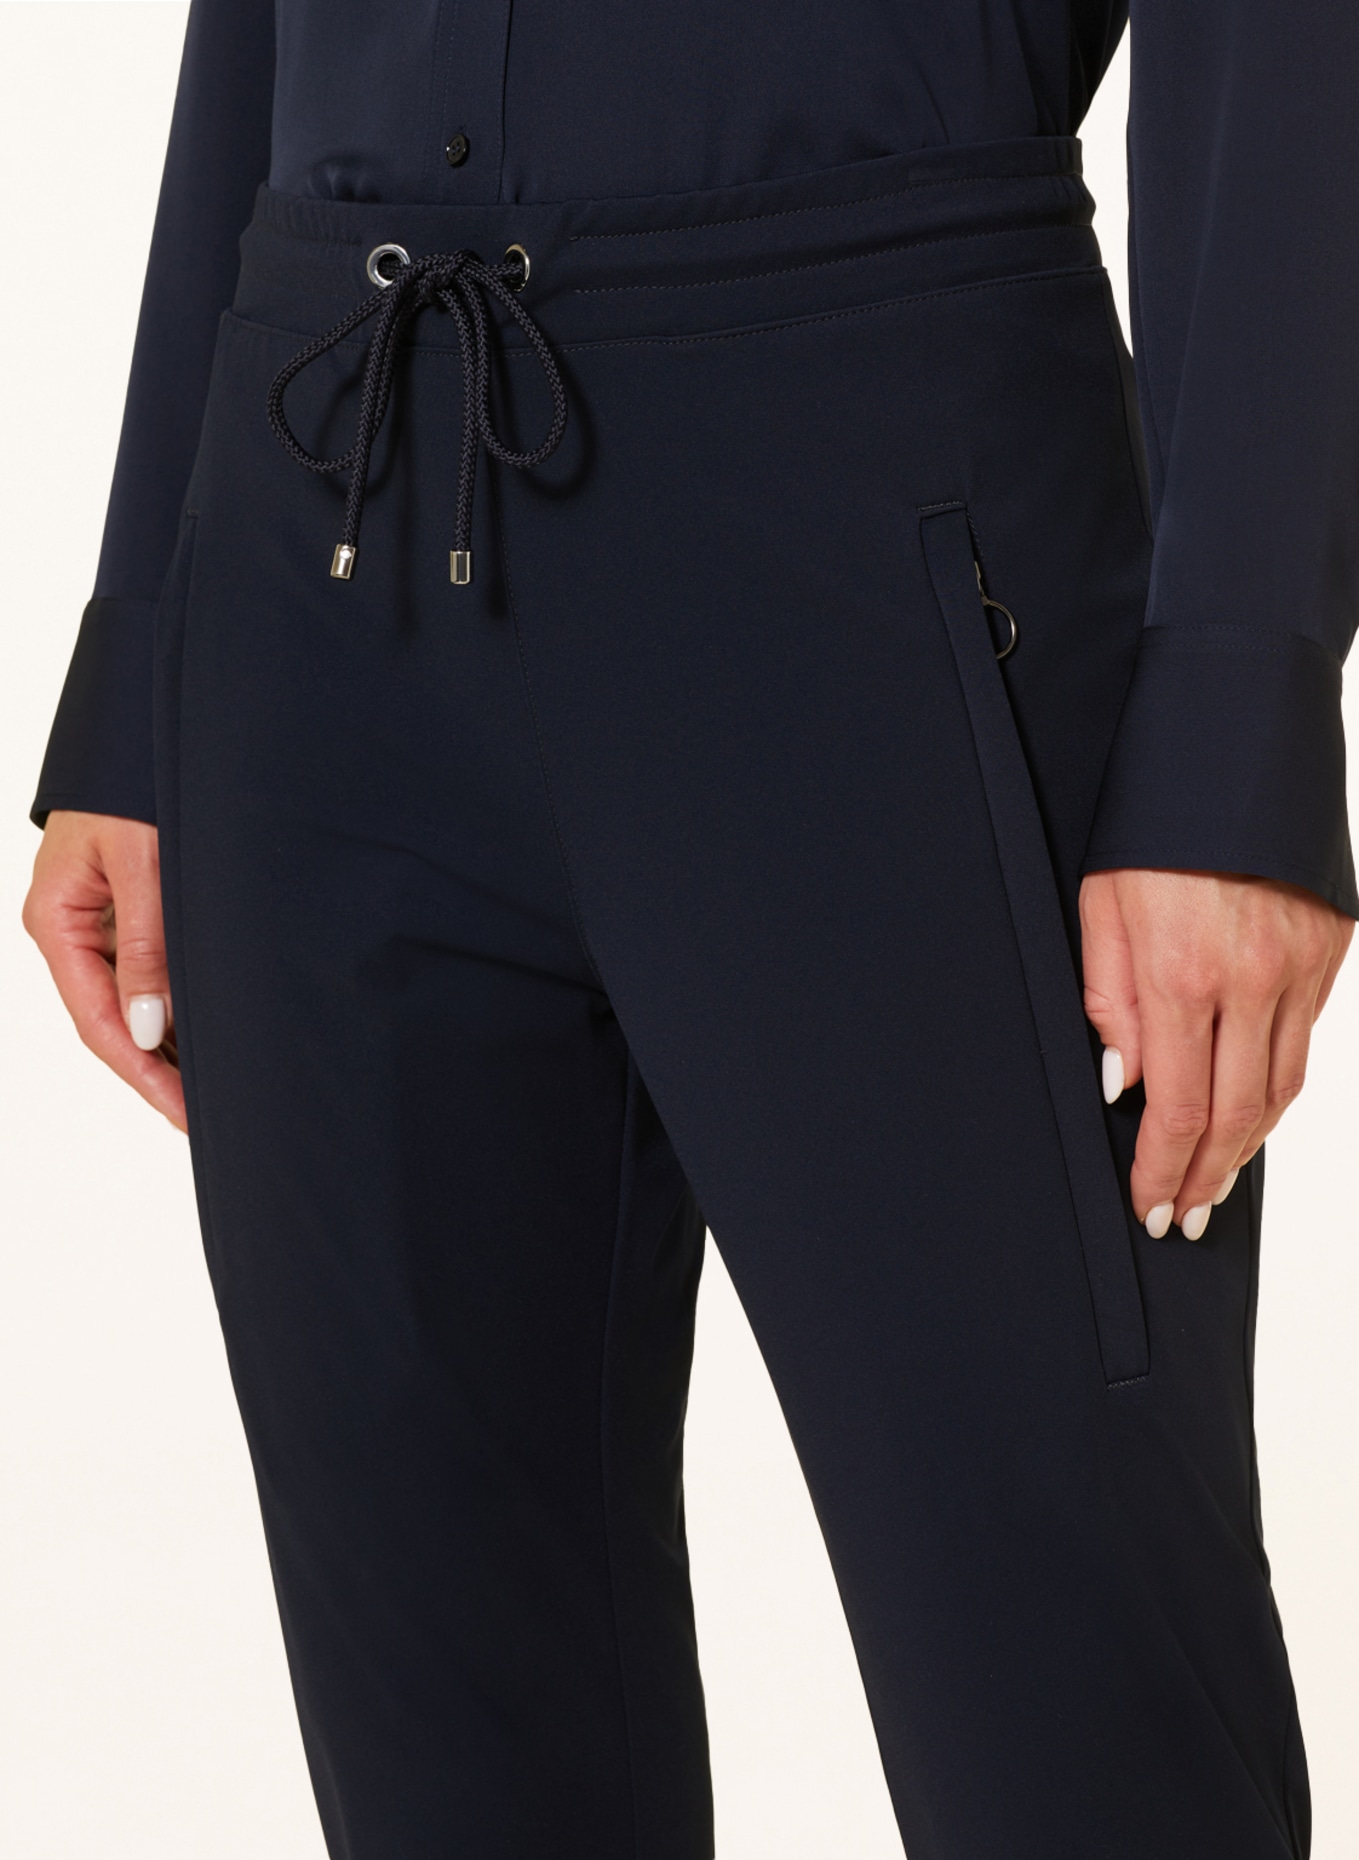 MAC 7/8 pants FUTURE in jogger style, Color: DARK BLUE (Image 5)